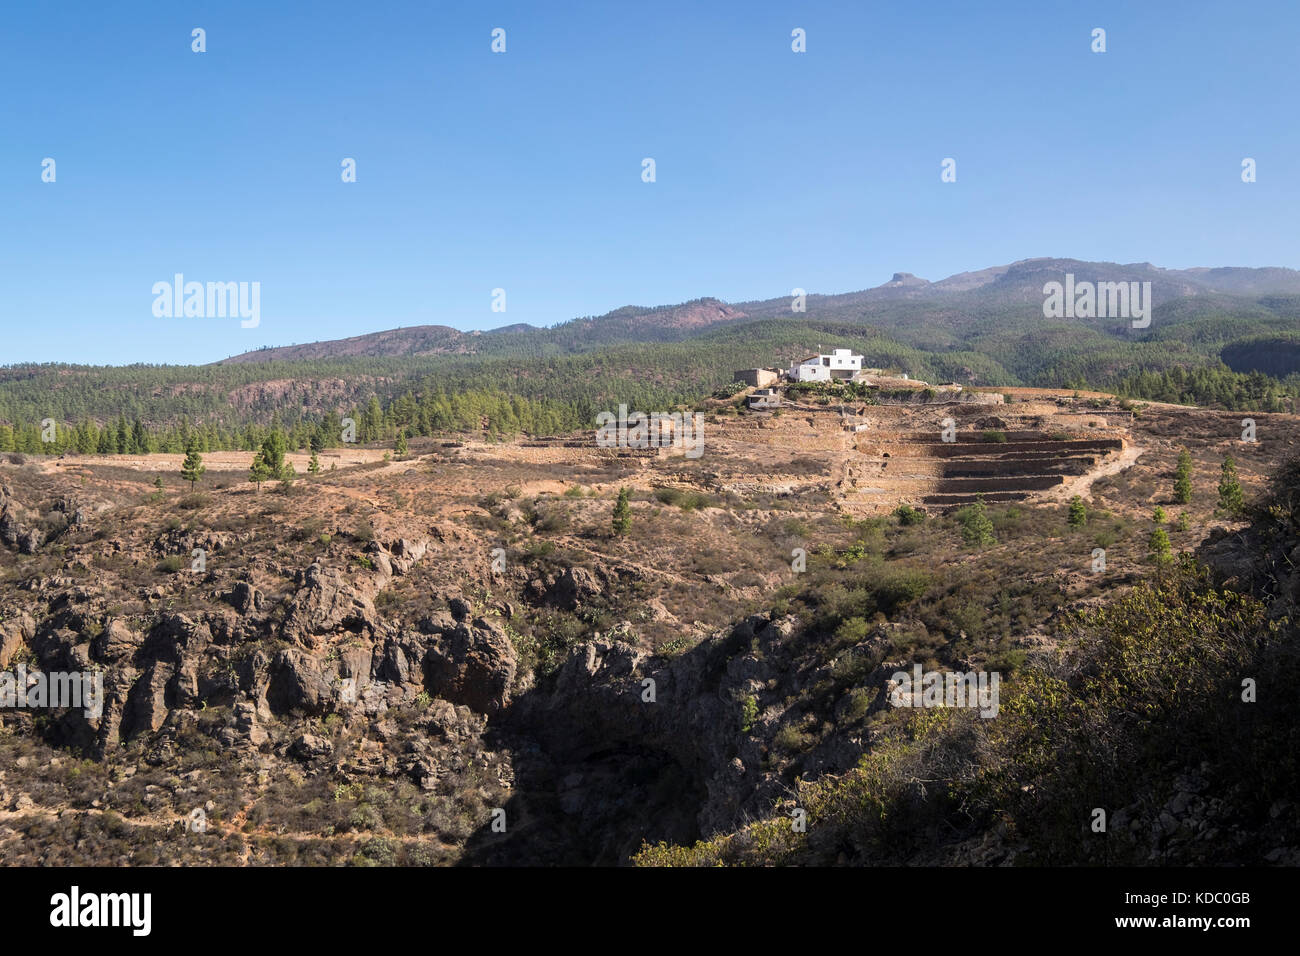 Isolated white farmhouse, finca, and terraces in Ifonche on the edge of the Barranco de los Fuentes, Adeje, Tenerife, Canary Islands, Spain Stock Photo